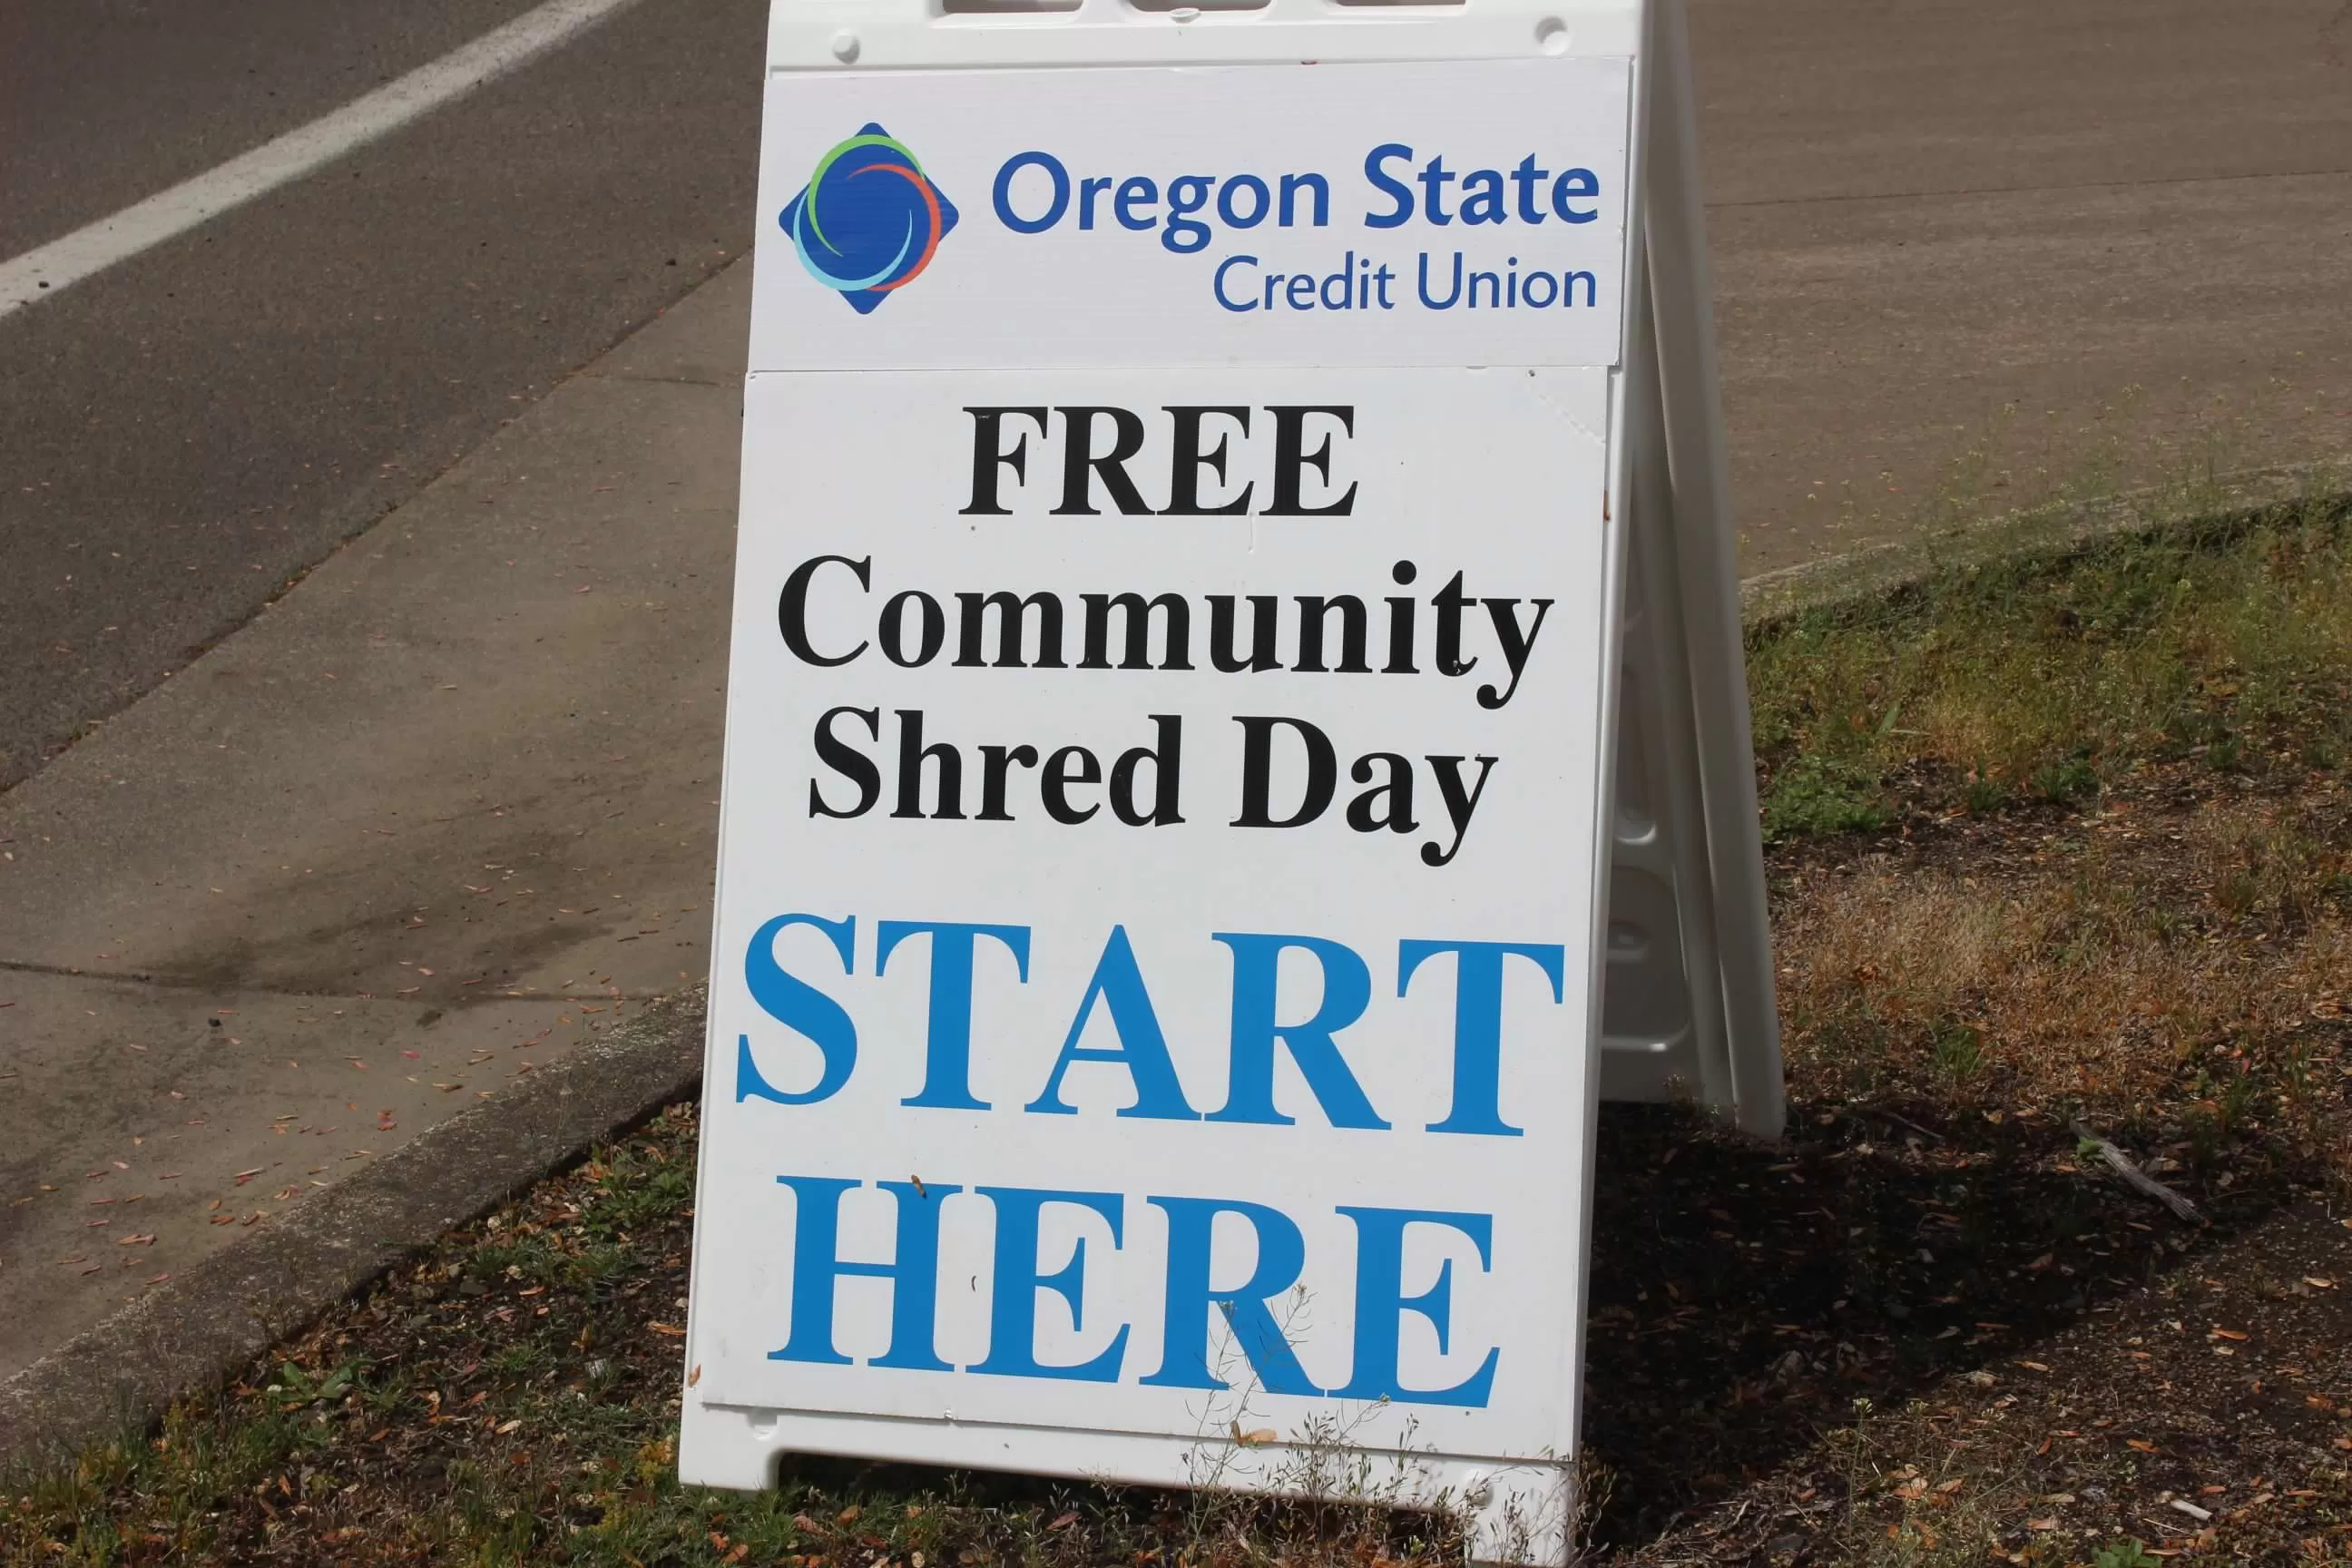 Shred Day sign - Start here - Oregon State Credit Union